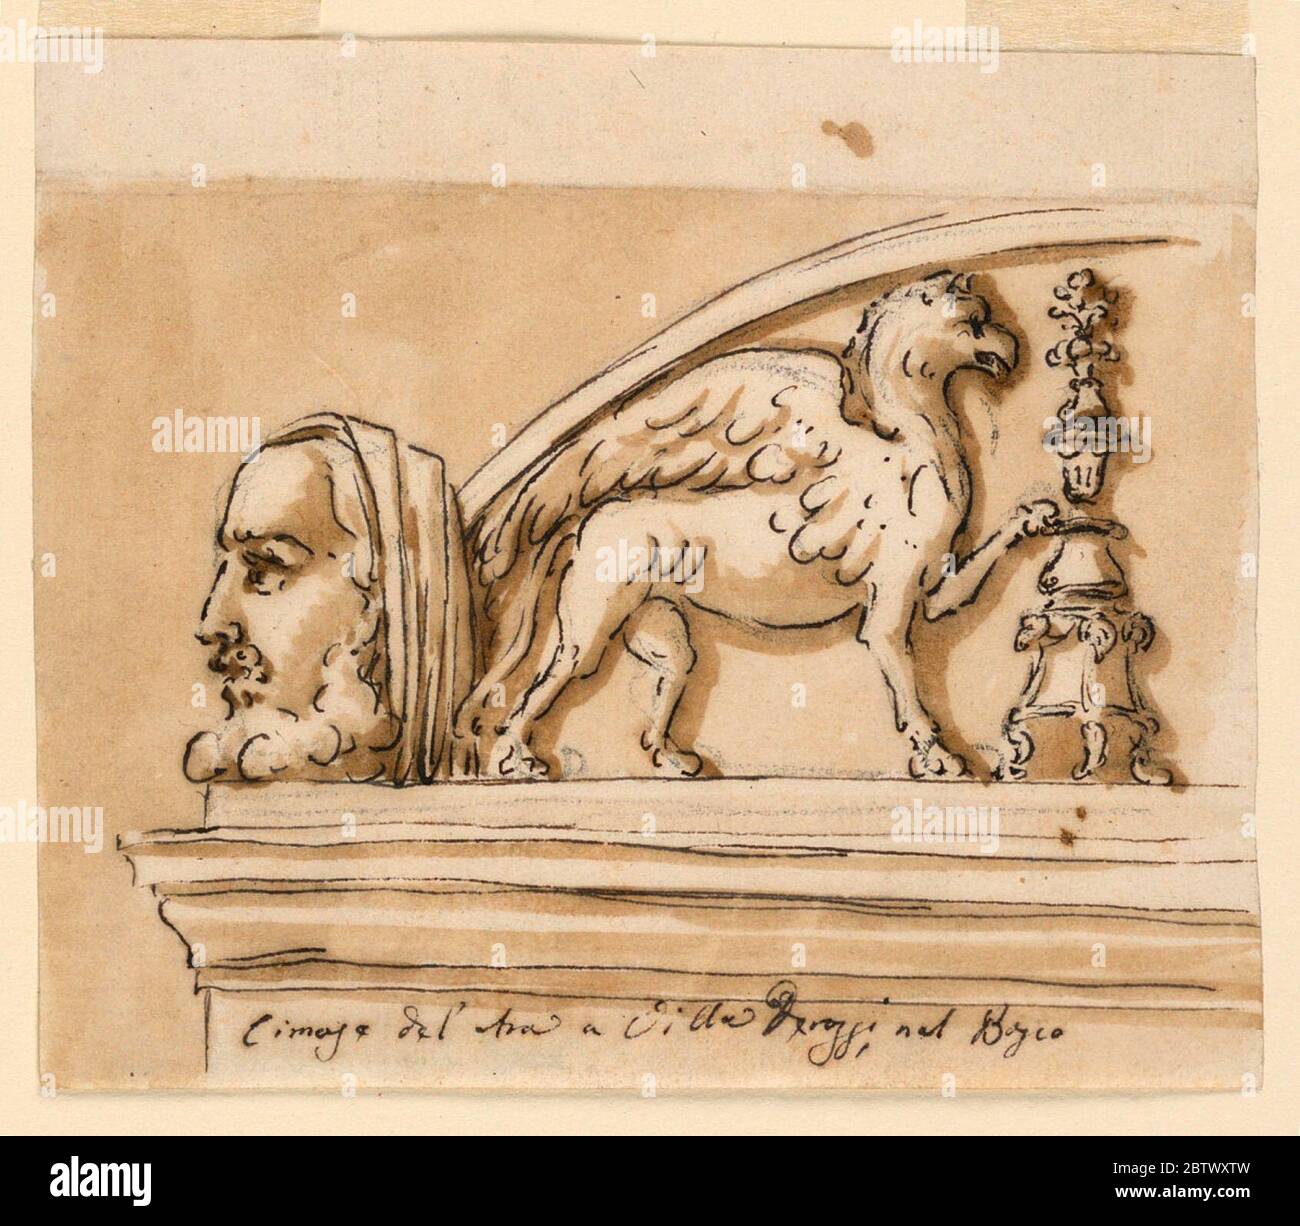 Cresting of an altar. Research in ProgressThe left side: above an entablature rises a panel framed by a segment. In it, beside a candelabrum, stands a griffin. In front of its left lower corner stands a bearded head as an acroterium. Caption below: 'Cimaze del'Ara a Villa Derossi nel Bosco'. Stock Photo